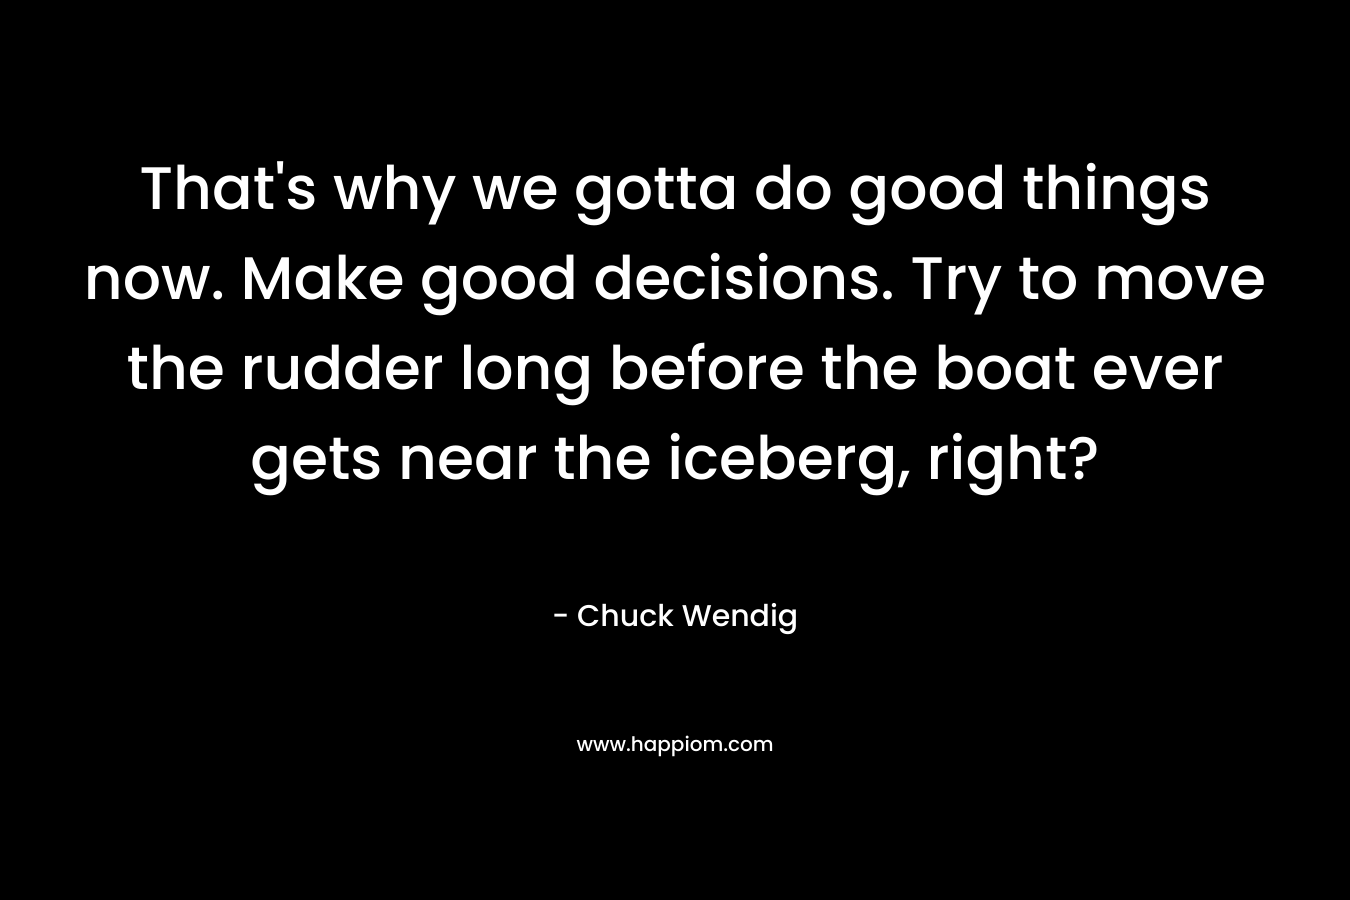 That's why we gotta do good things now. Make good decisions. Try to move the rudder long before the boat ever gets near the iceberg, right?